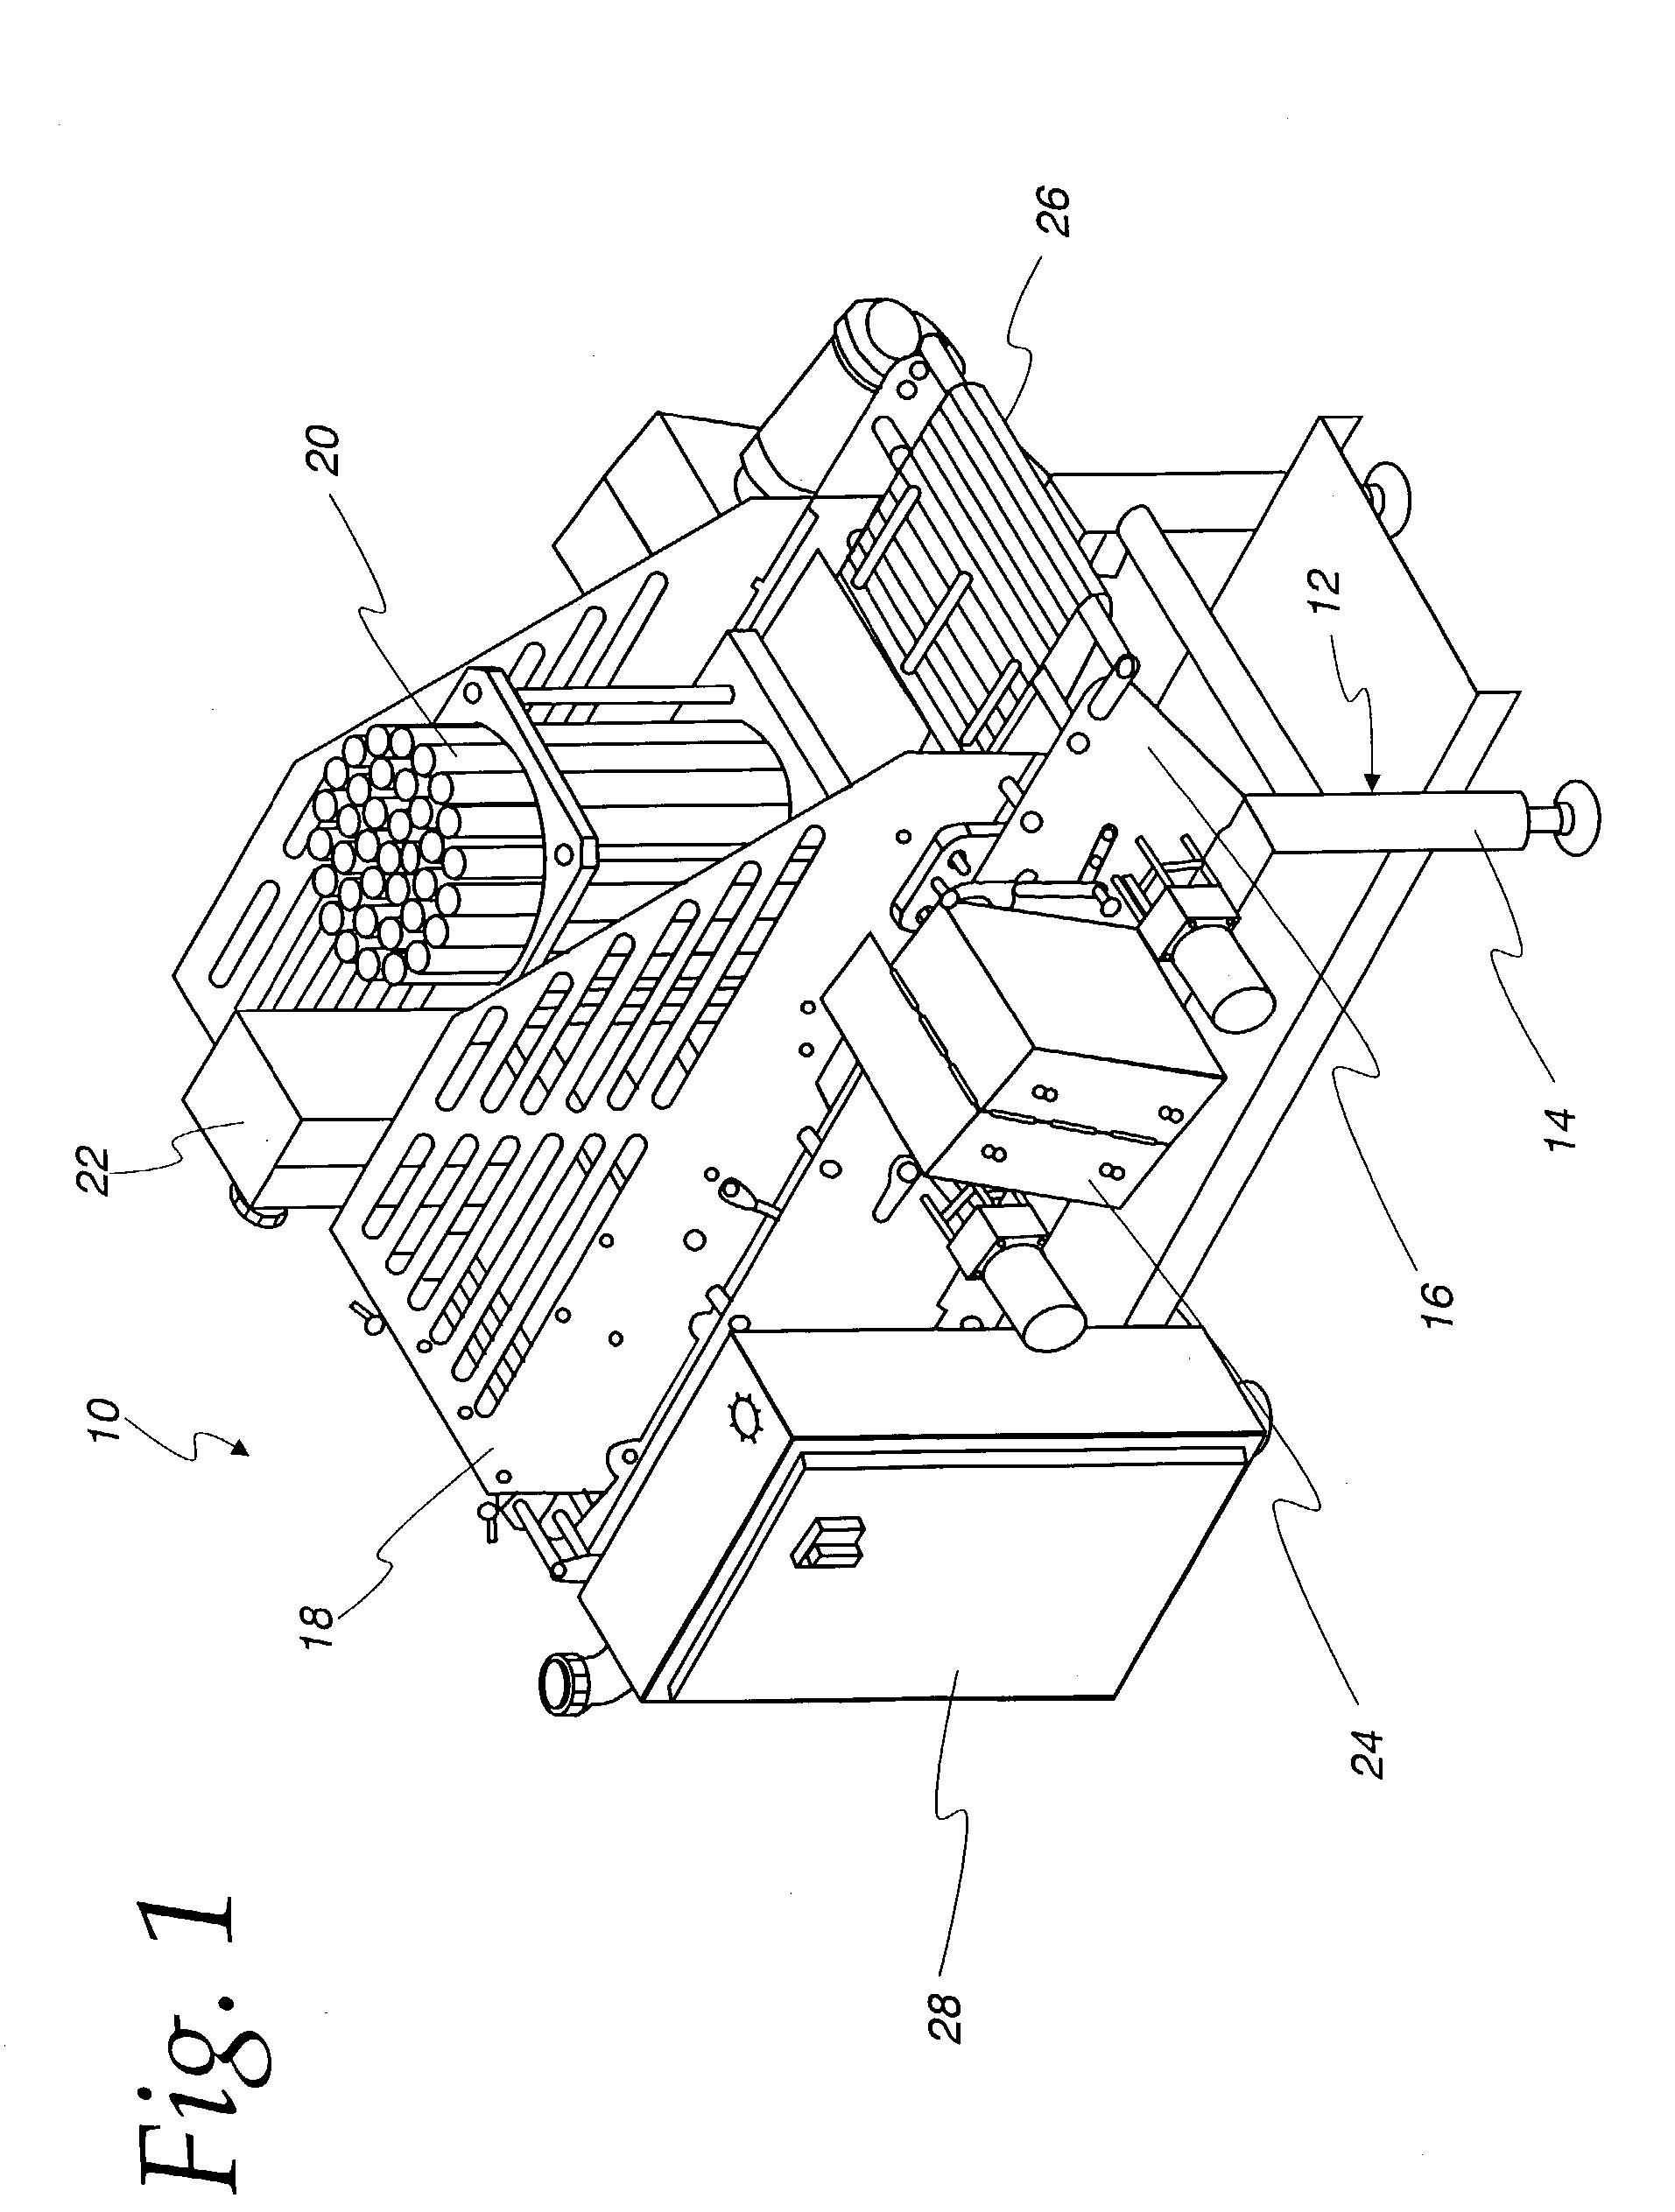 Food slicing apparatus for a food processing line